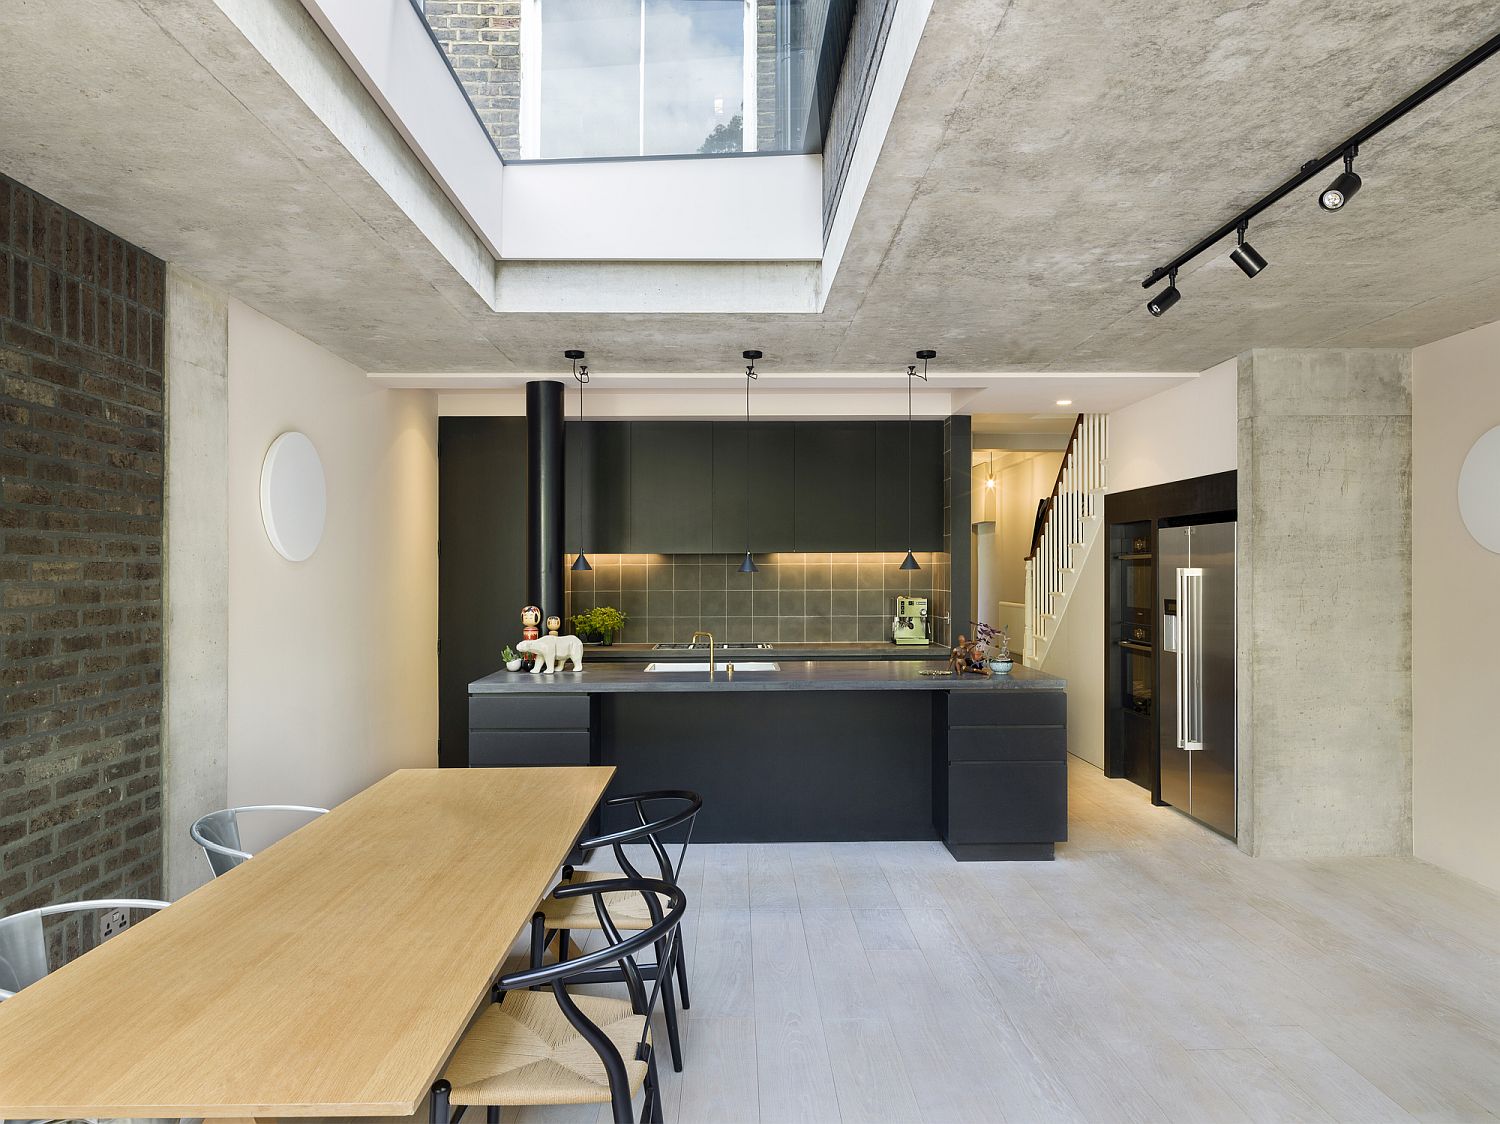 Fabulous-new-social-kitchen-and-dining-area-inside-concrete-and-brick-rear-extension-of-Victorian-terraced-house-in-London-by-Gundry-Ducker-19366